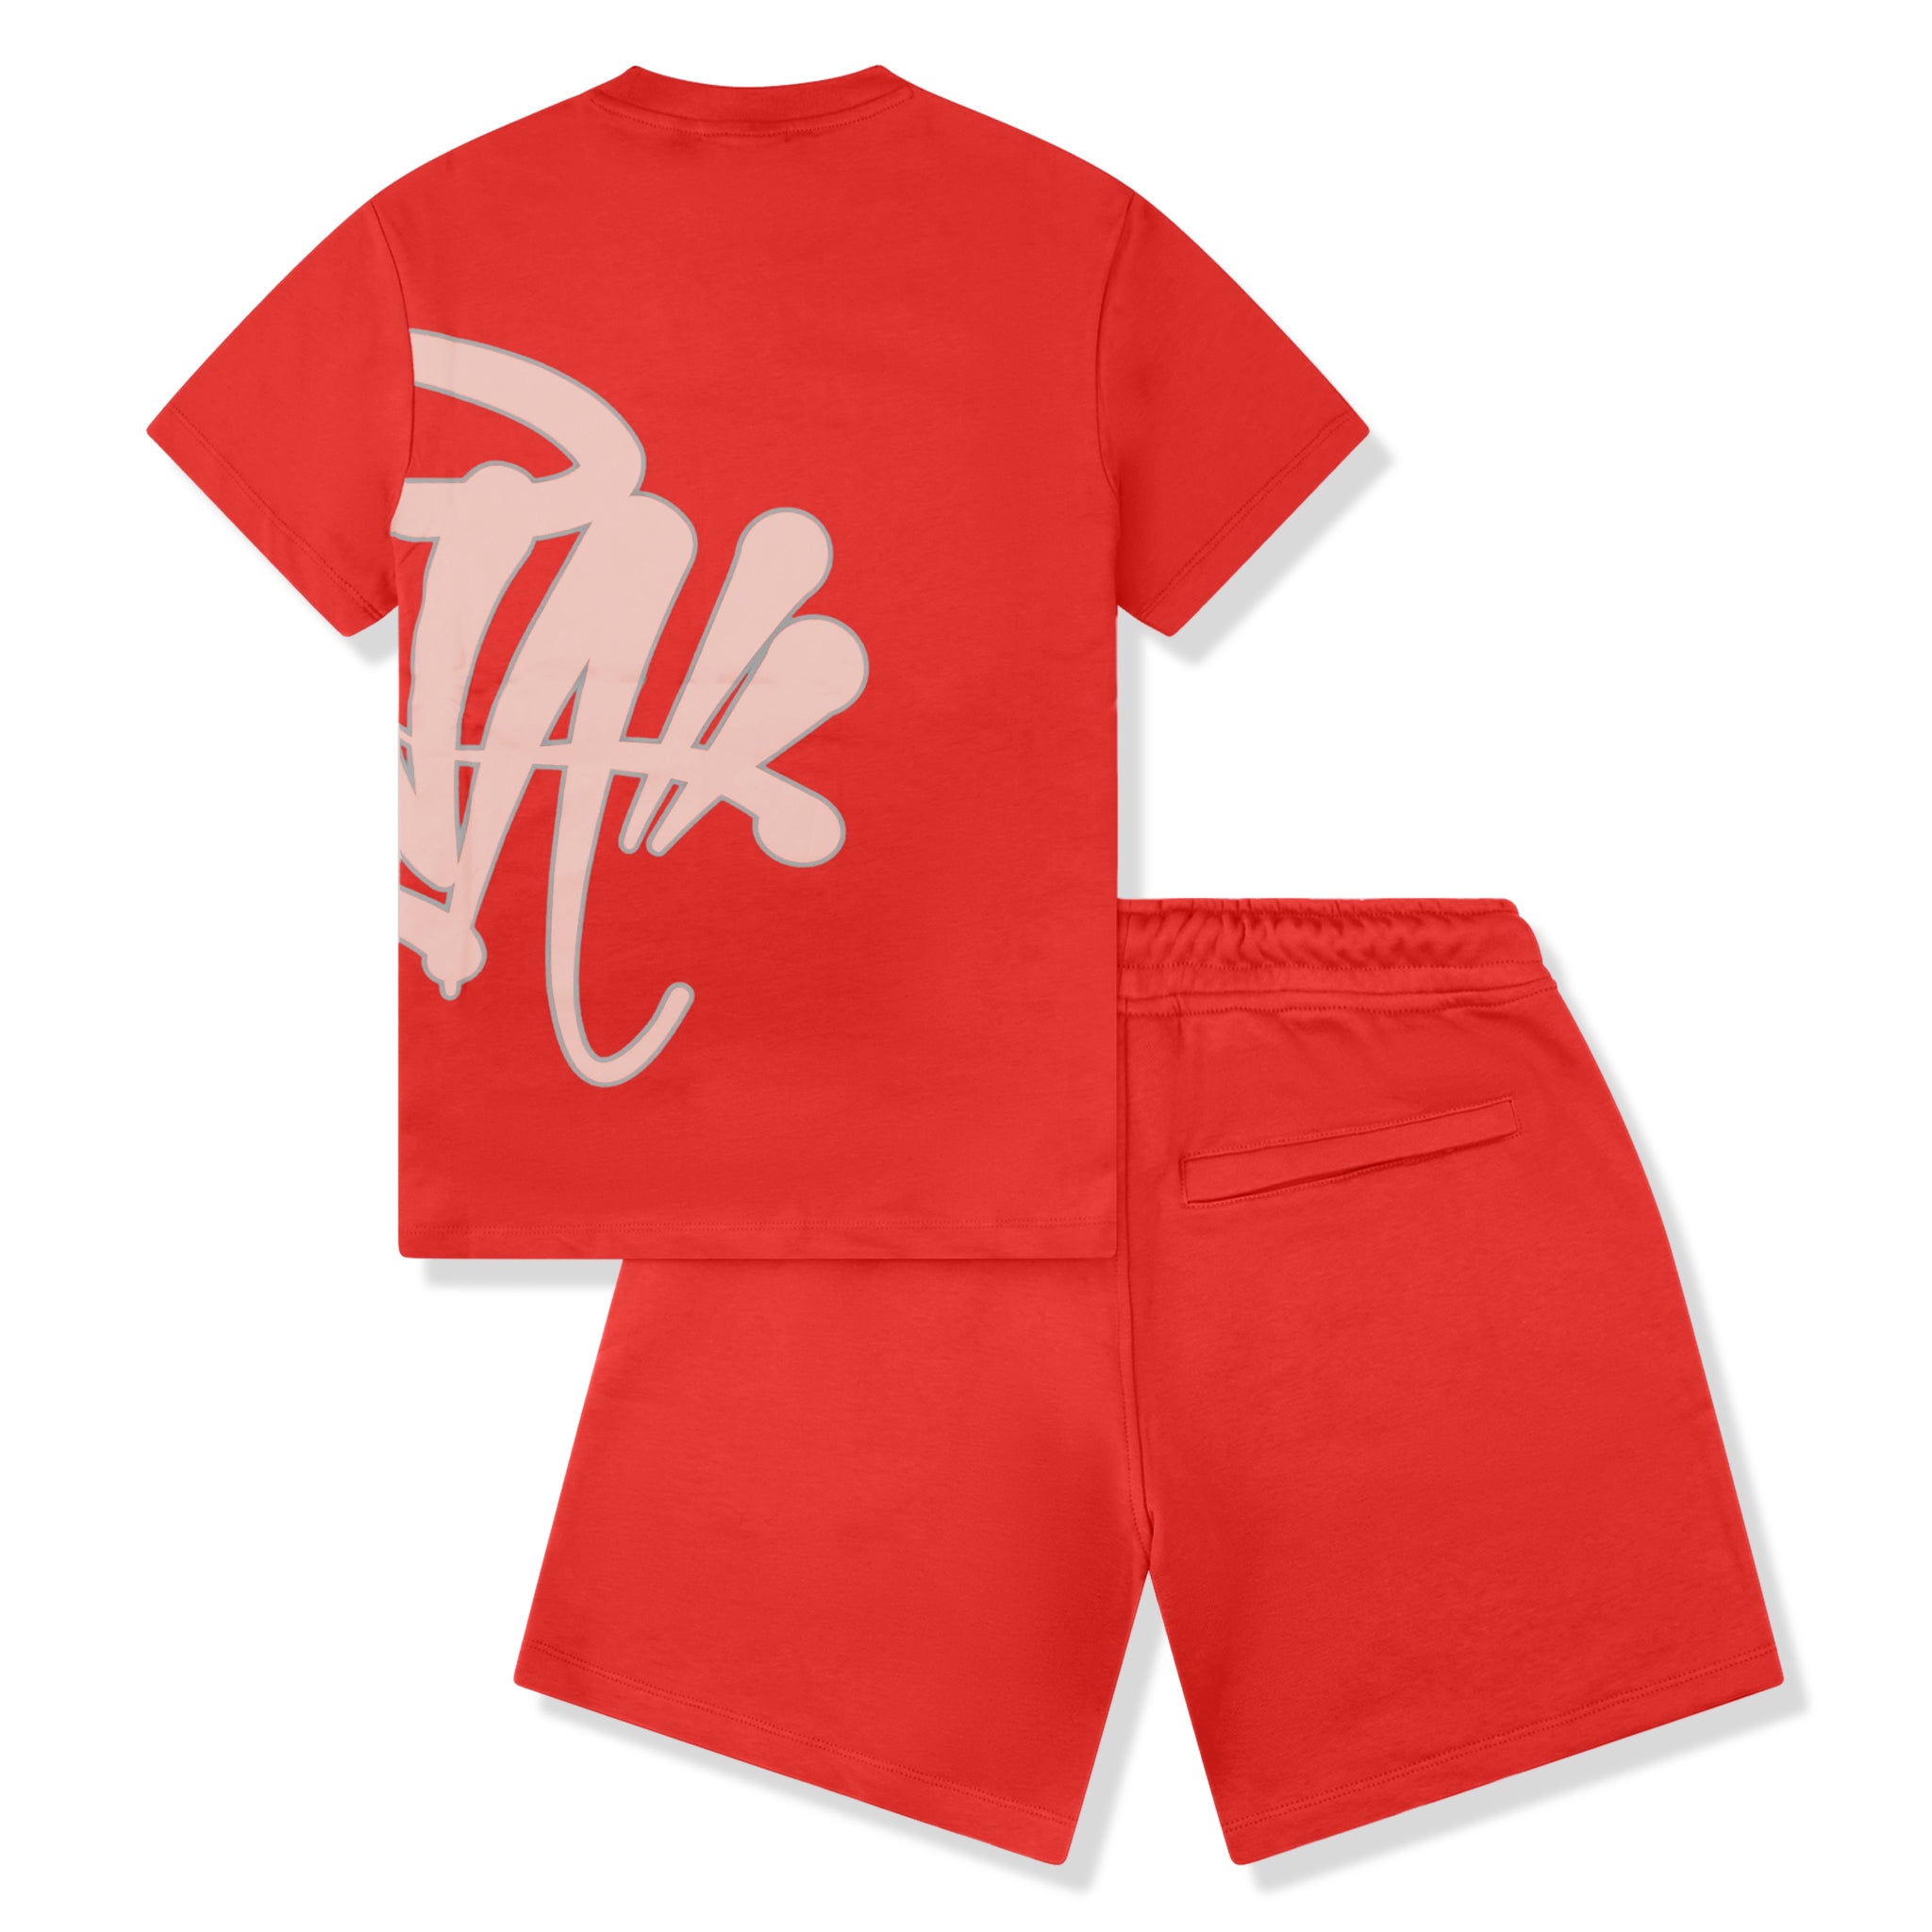 Back set view of Syna World Logo Red T-Shirt & Shorts SYNA-TEE-RED